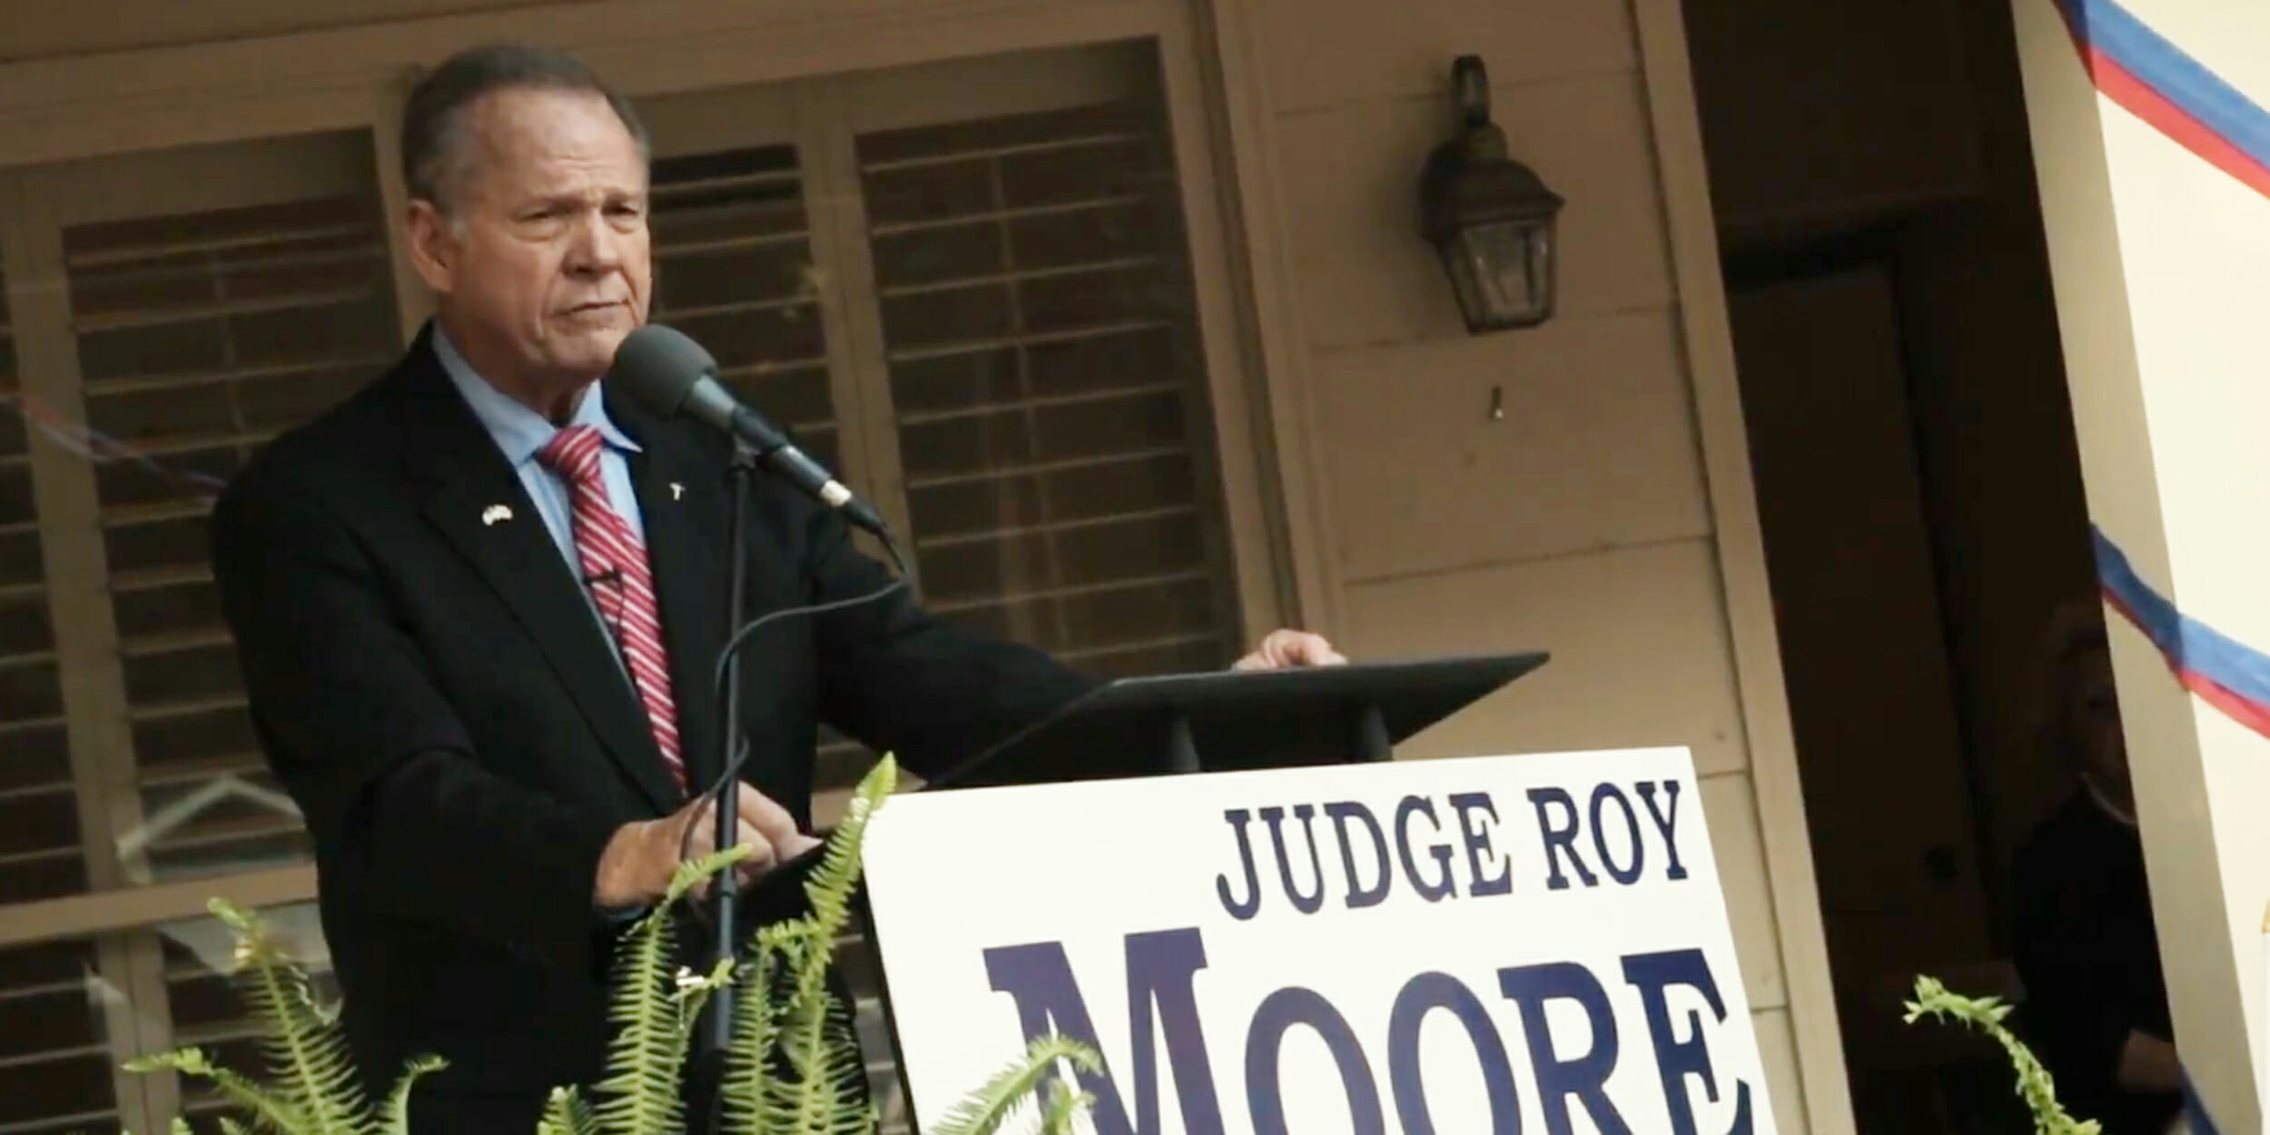 Republican senate candidate Roy Moore sent out a fundraising email following a report where women said he engaged in sexual misconduct with them in the past